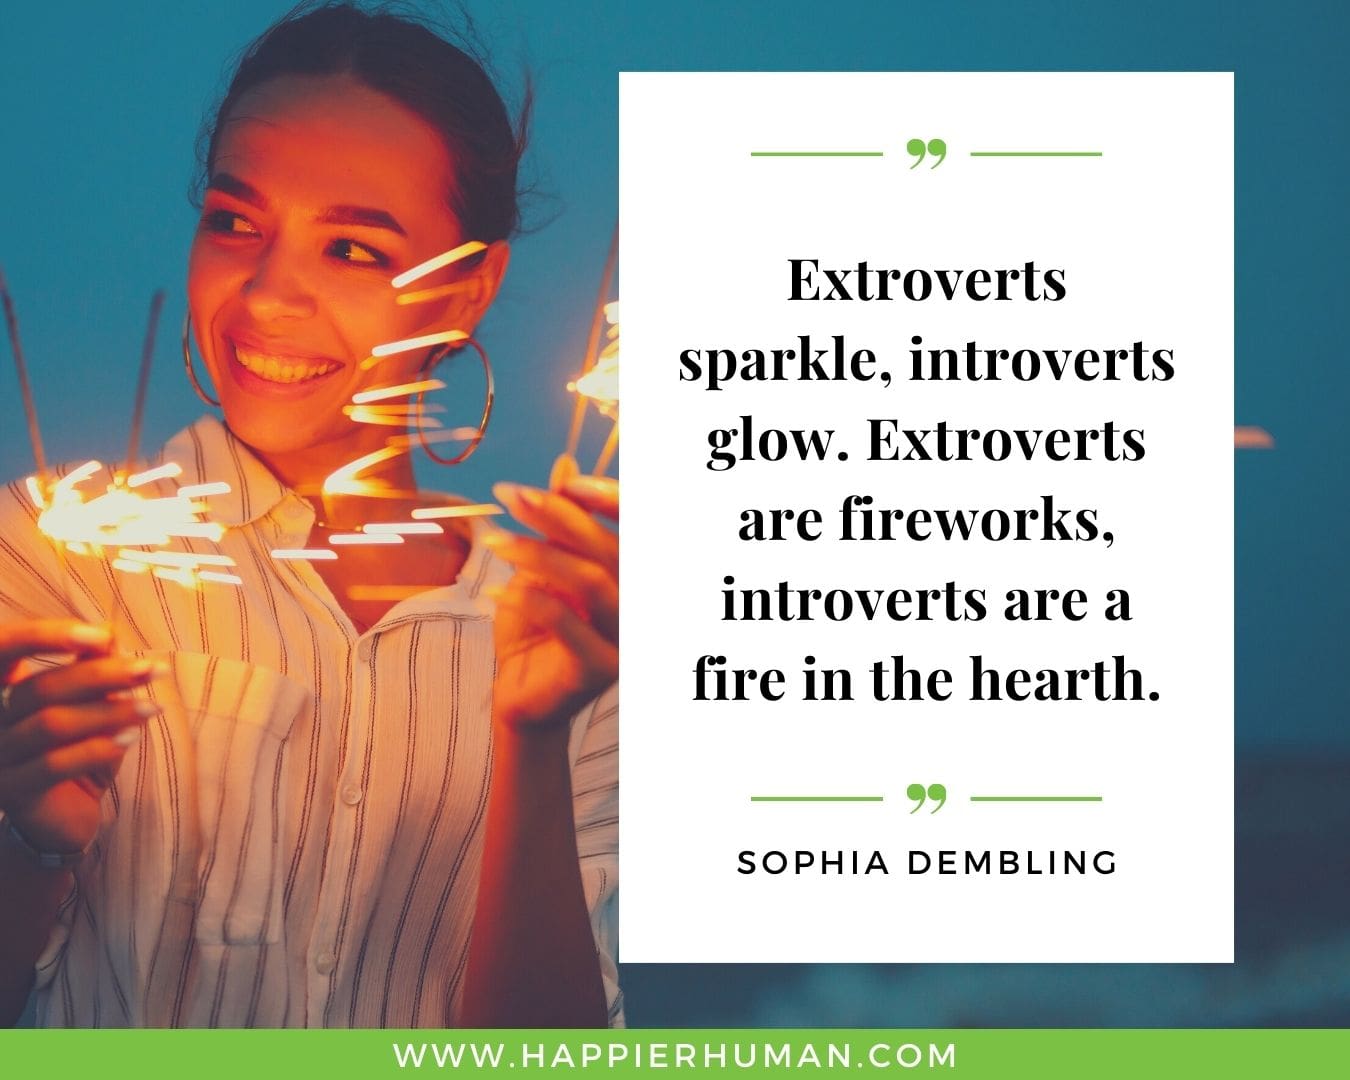 Introvert Quotes - “Extroverts sparkle, introverts glow. Extroverts are fireworks, introverts are a fire in the hearth.” – Sophia Dembling